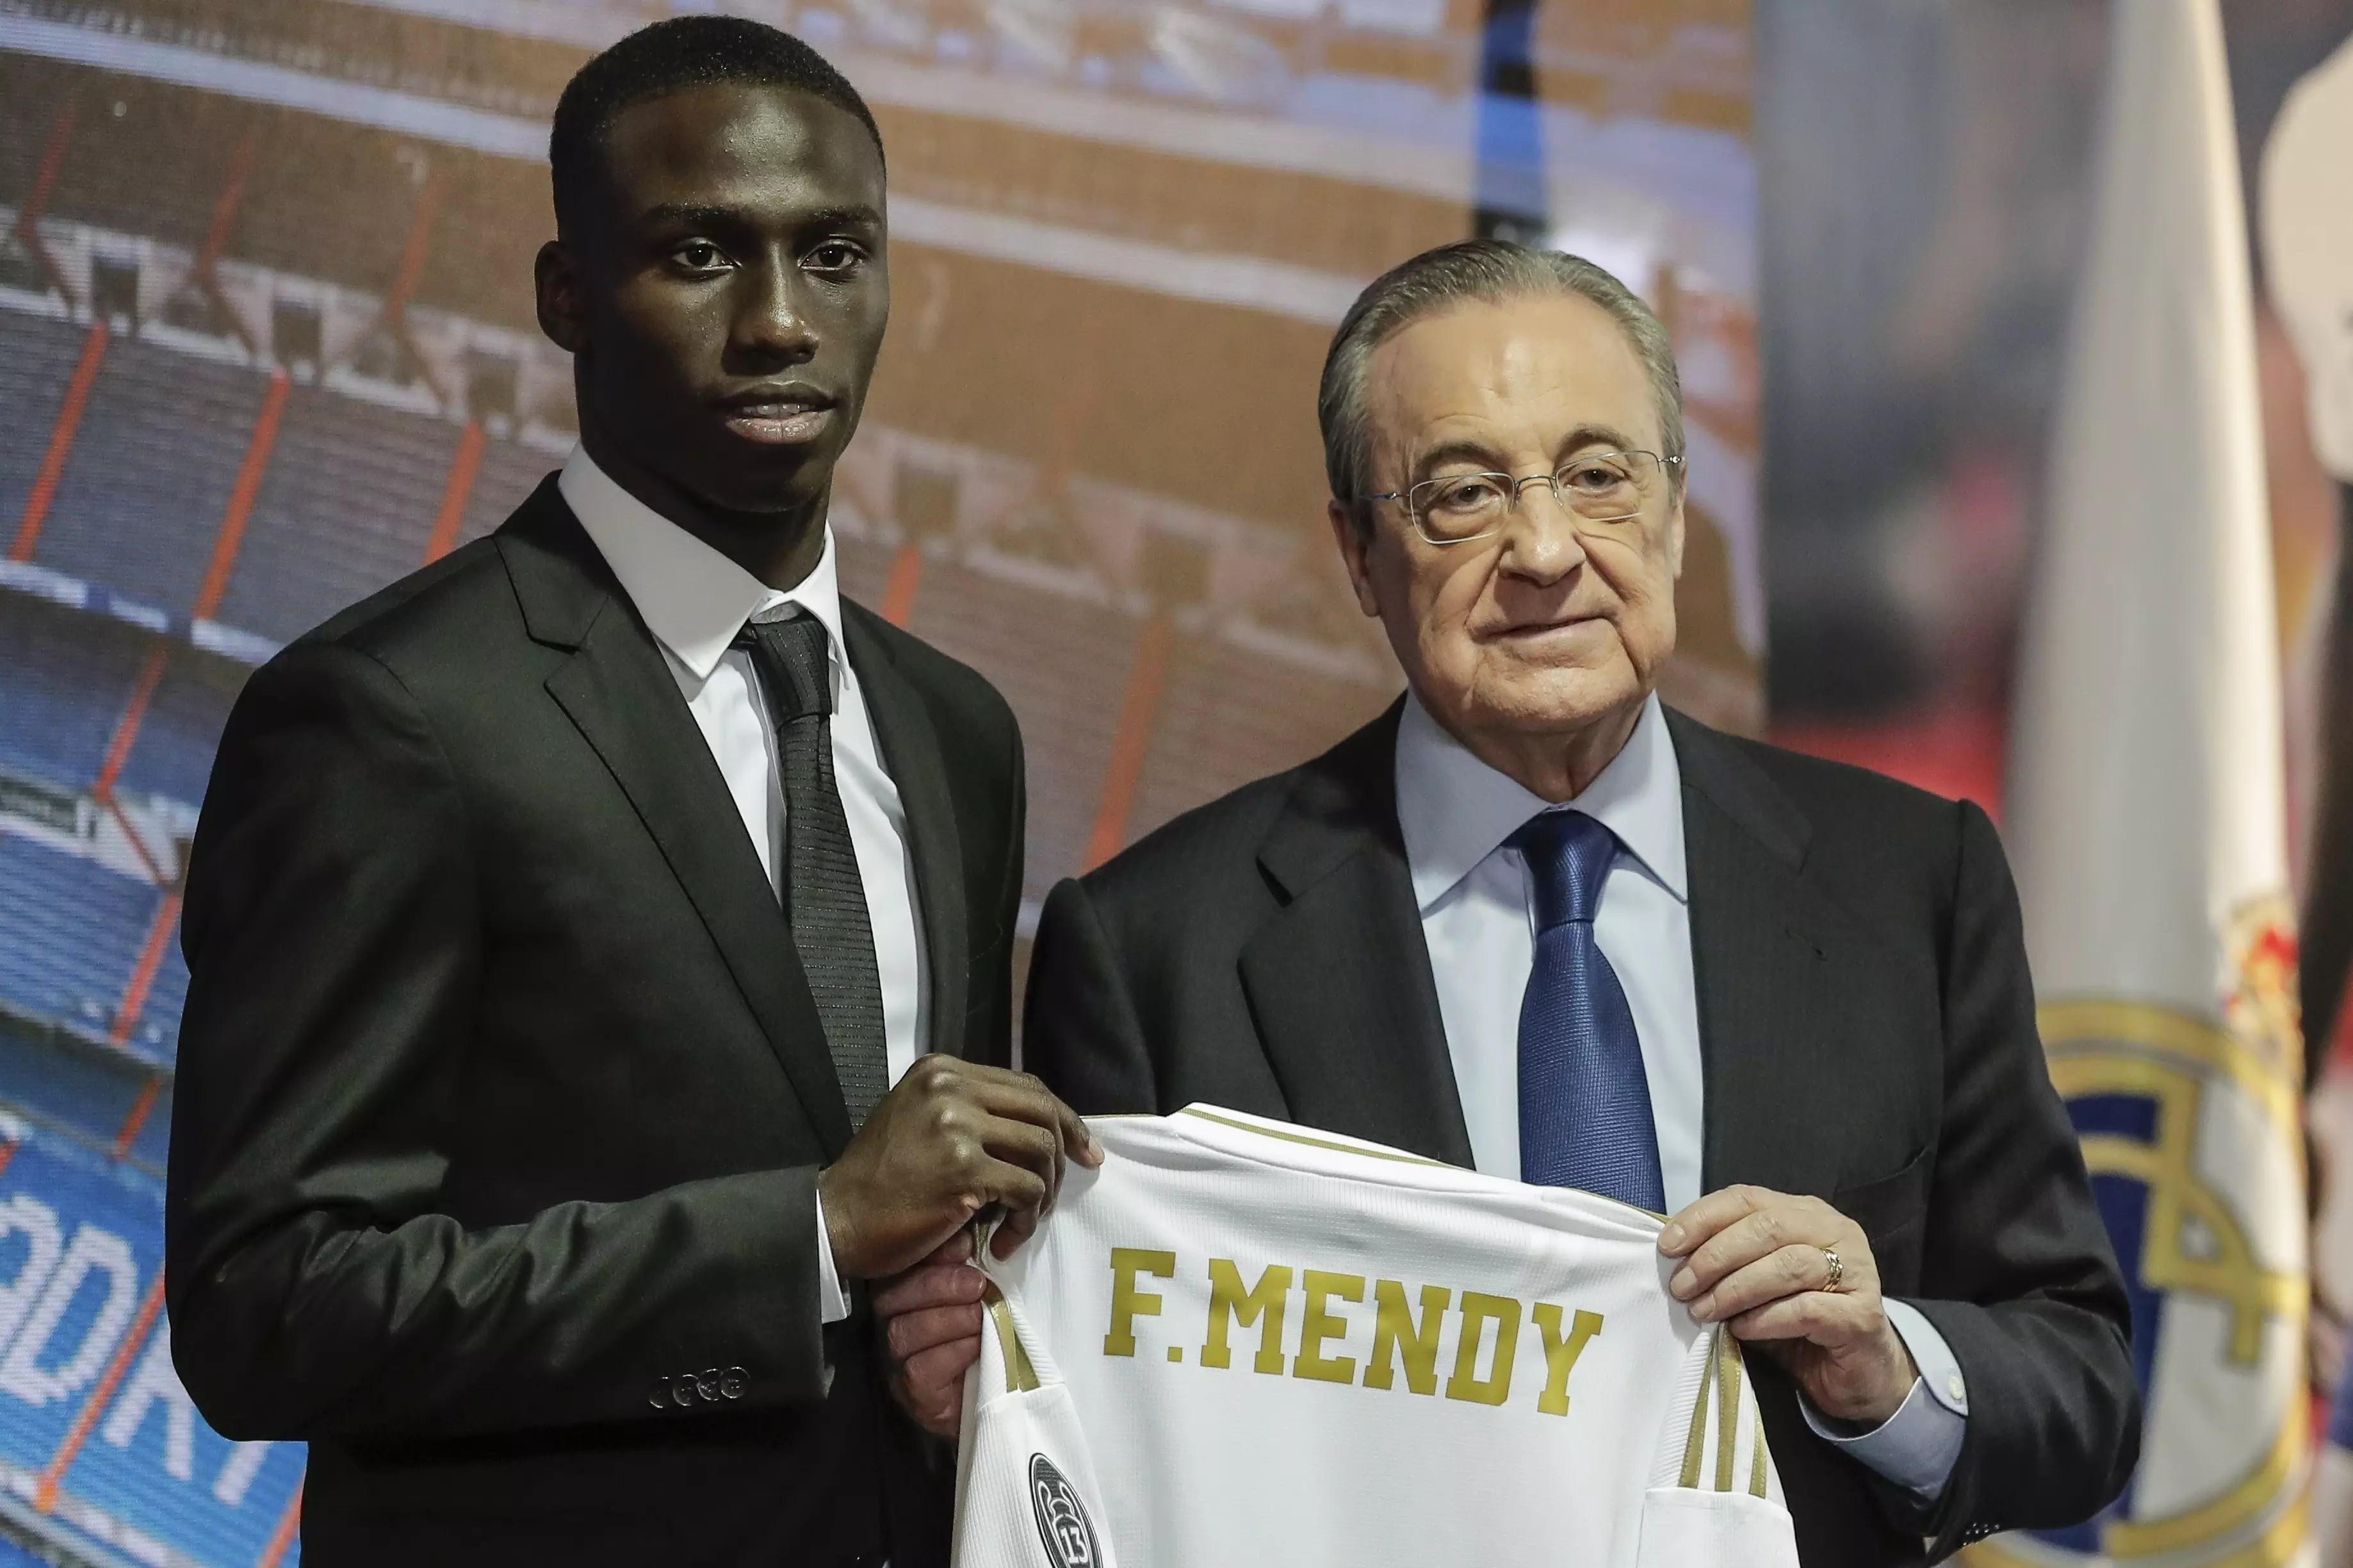 Ferland Mendy at his unveiling. Image: PA Images